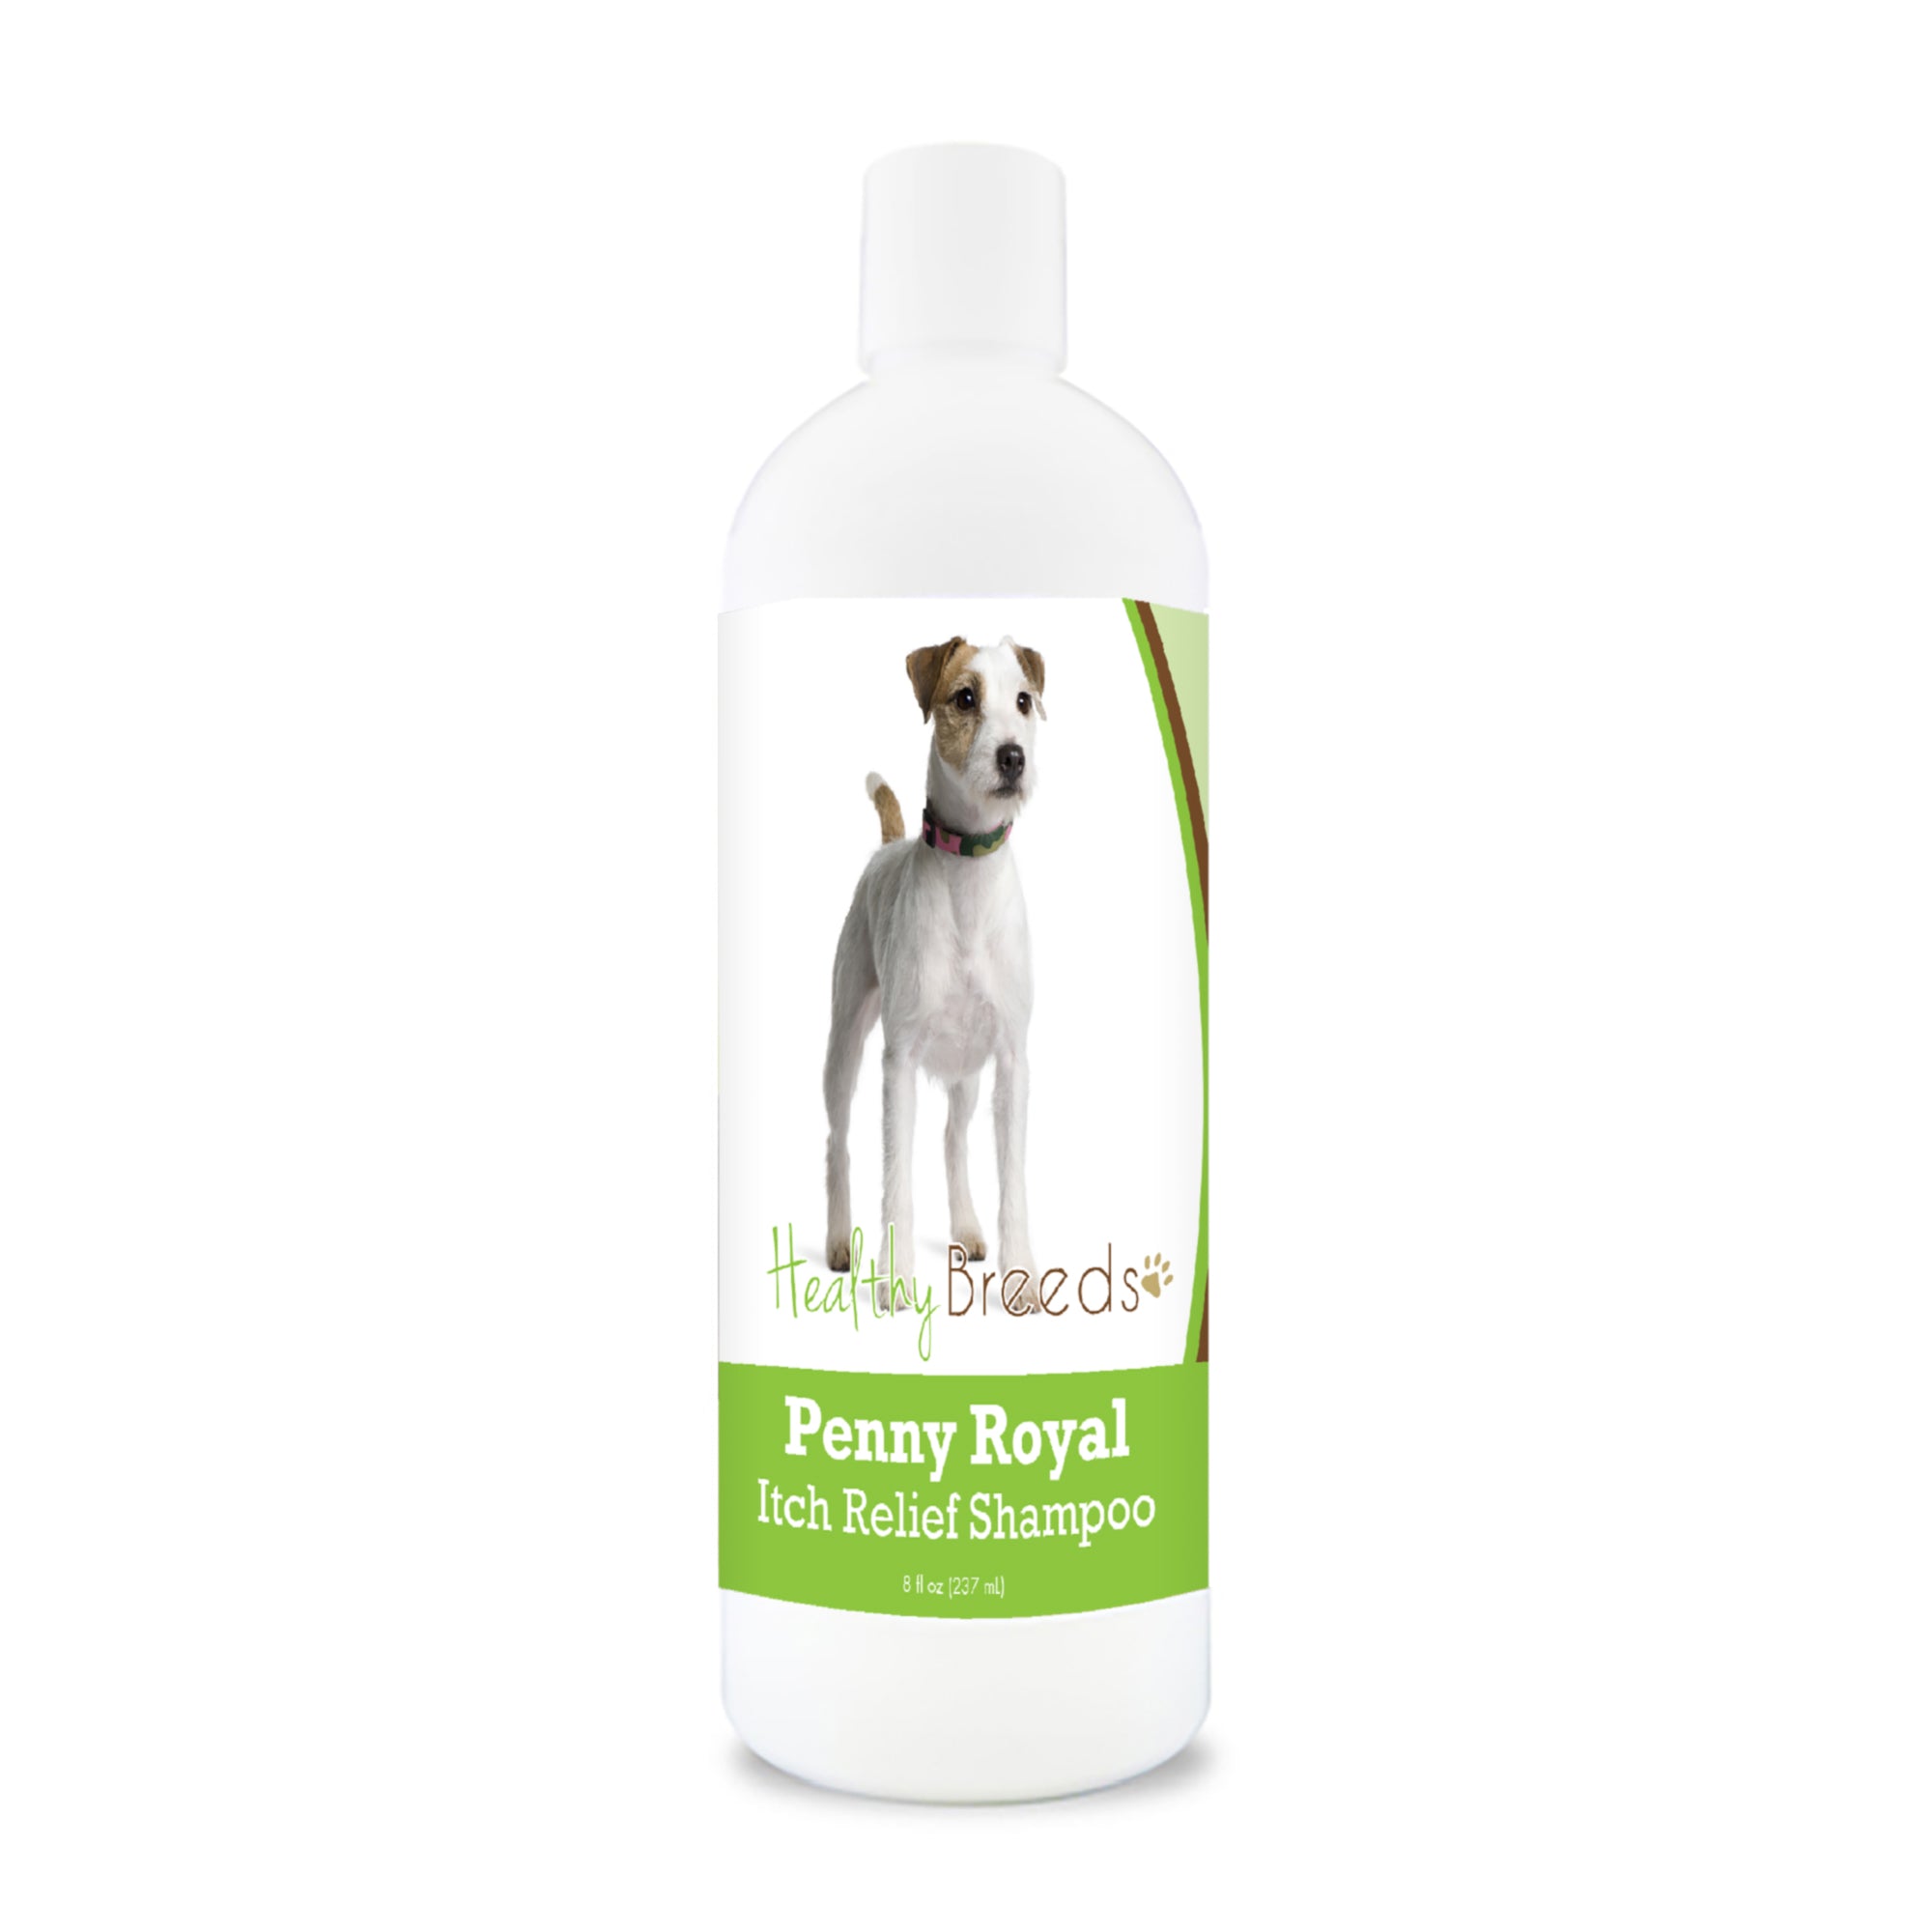 Parson Russell Terrier Penny Royal Itch Relief Shampoo 8 oz